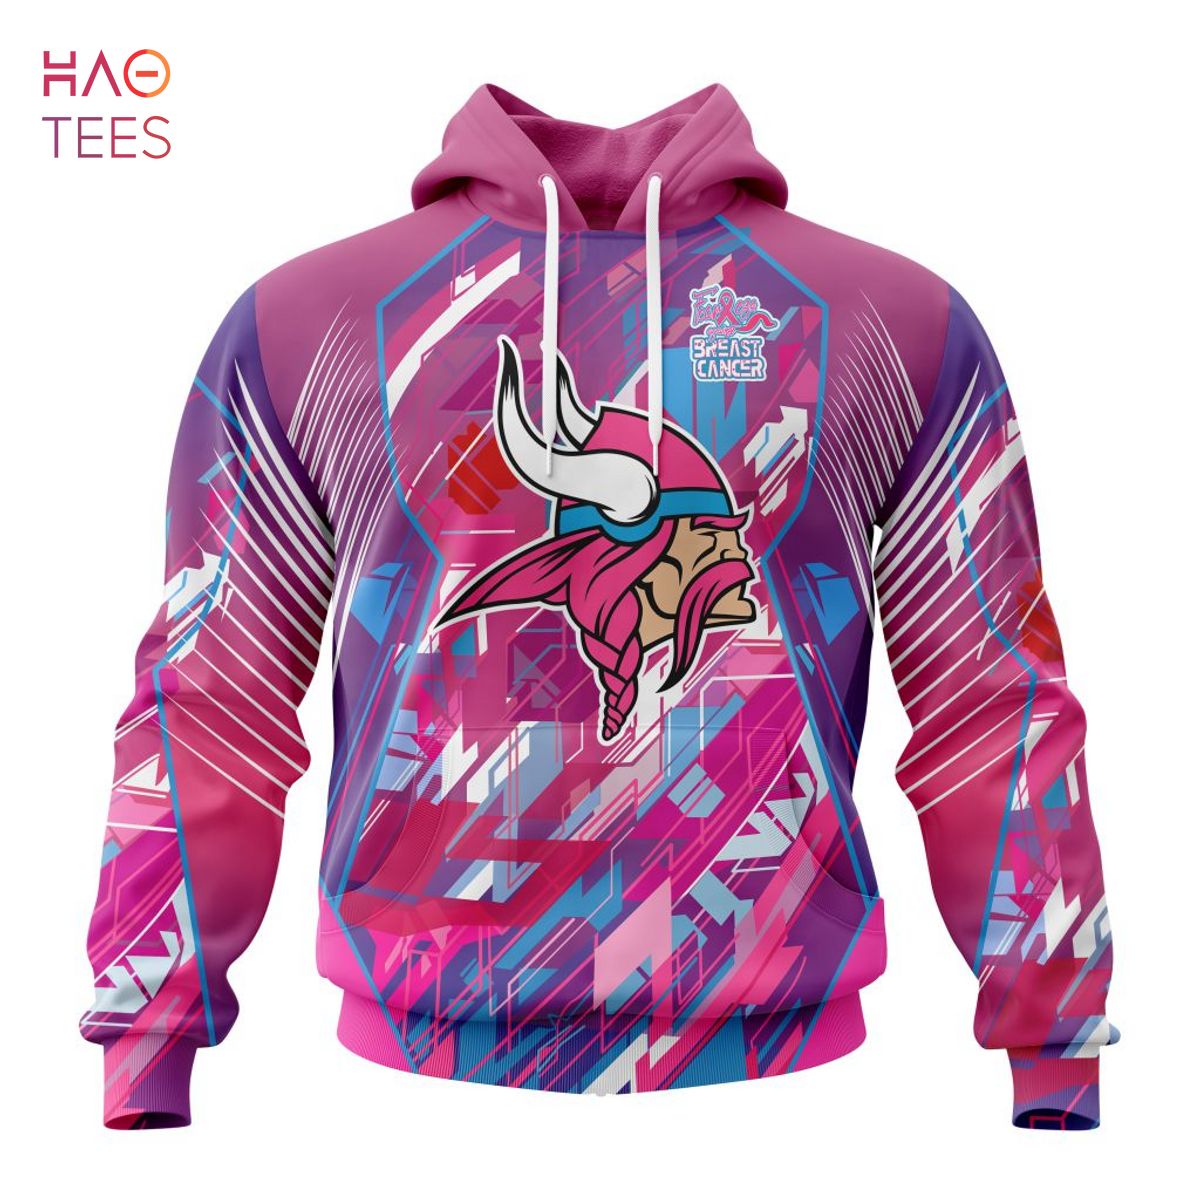 BEST NFL Minnesota Vikings, Specialized Design I Pink I Can! Fearless Again Breast Cancer 3D Hoodie